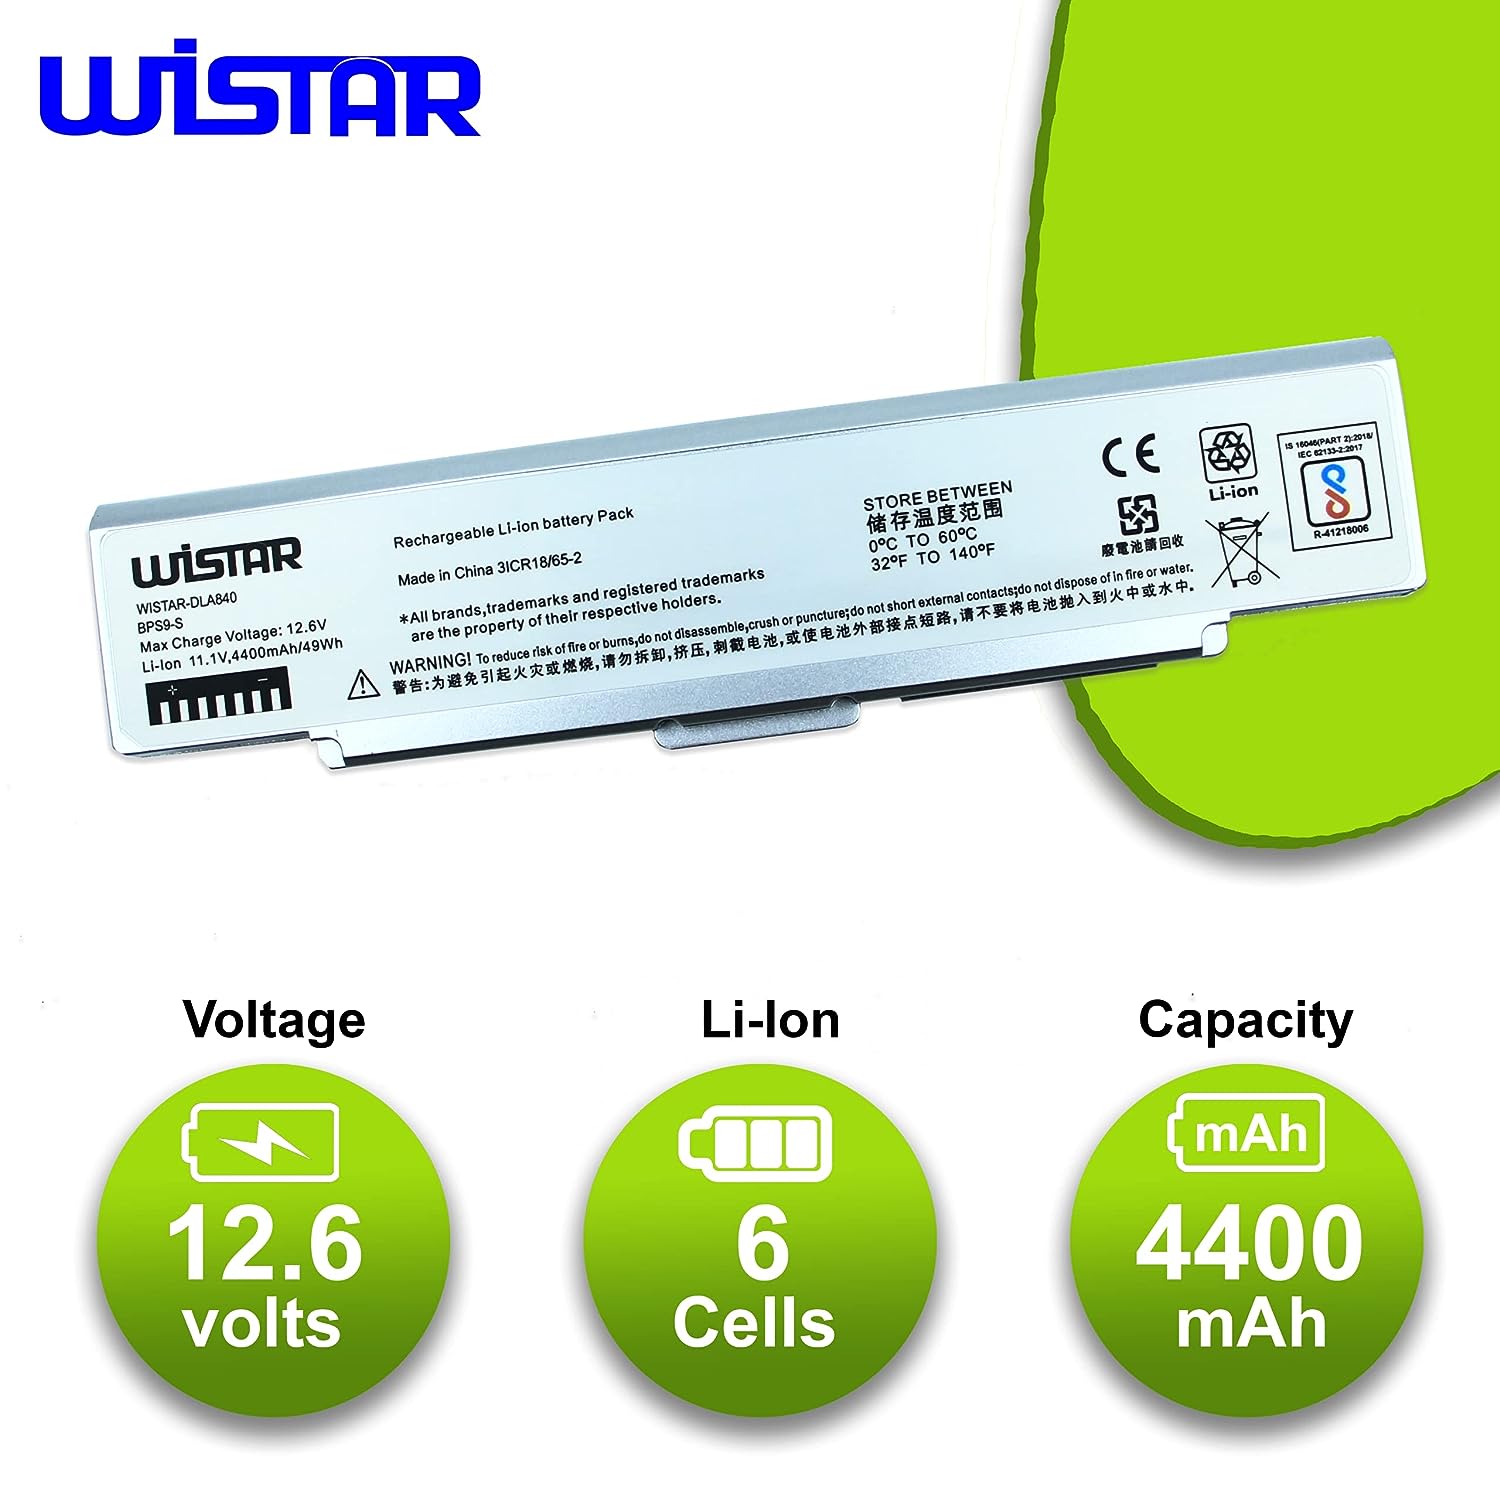 WISTAR Laptop Battery Compatible for Sony BPS9 VGP-BPL9 VGP-BPS9 VGP-BPS9/B VGP-BPS9/S VGP-BPS9A VGP-BPS9A/B Silver